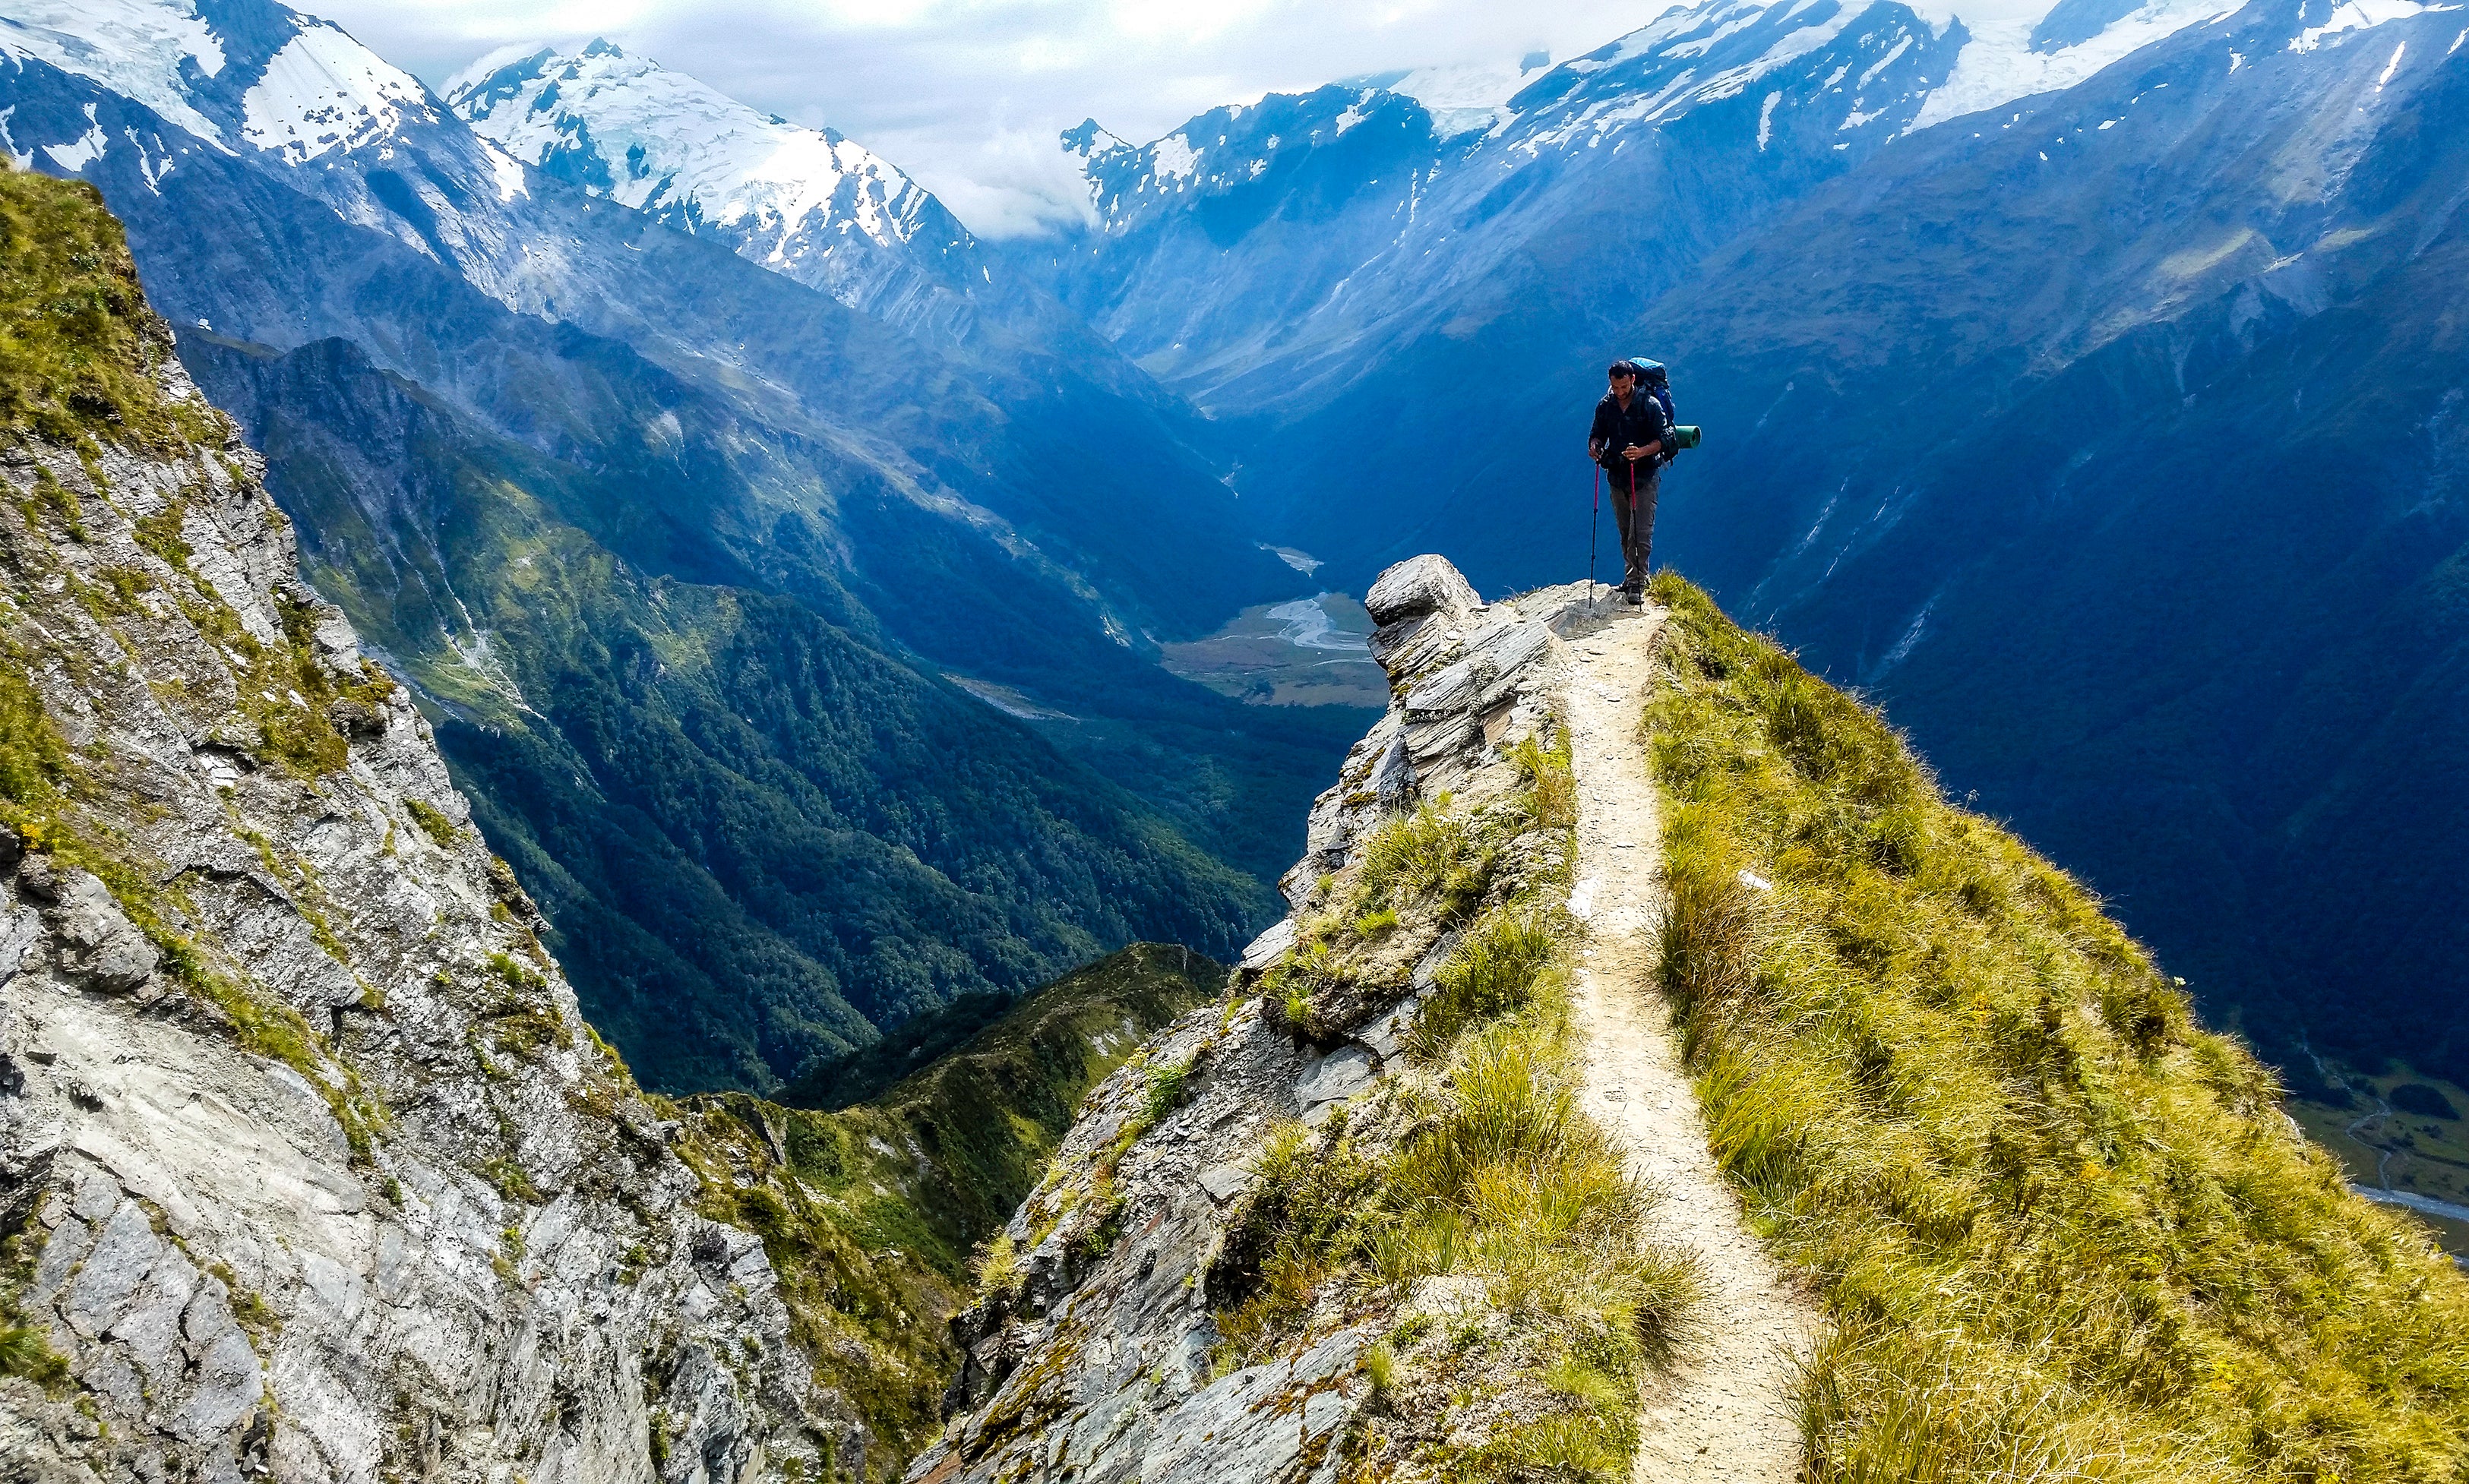 Hike the Cascade Saddle route in the picturesque scenery of Mount Aspiring National Park